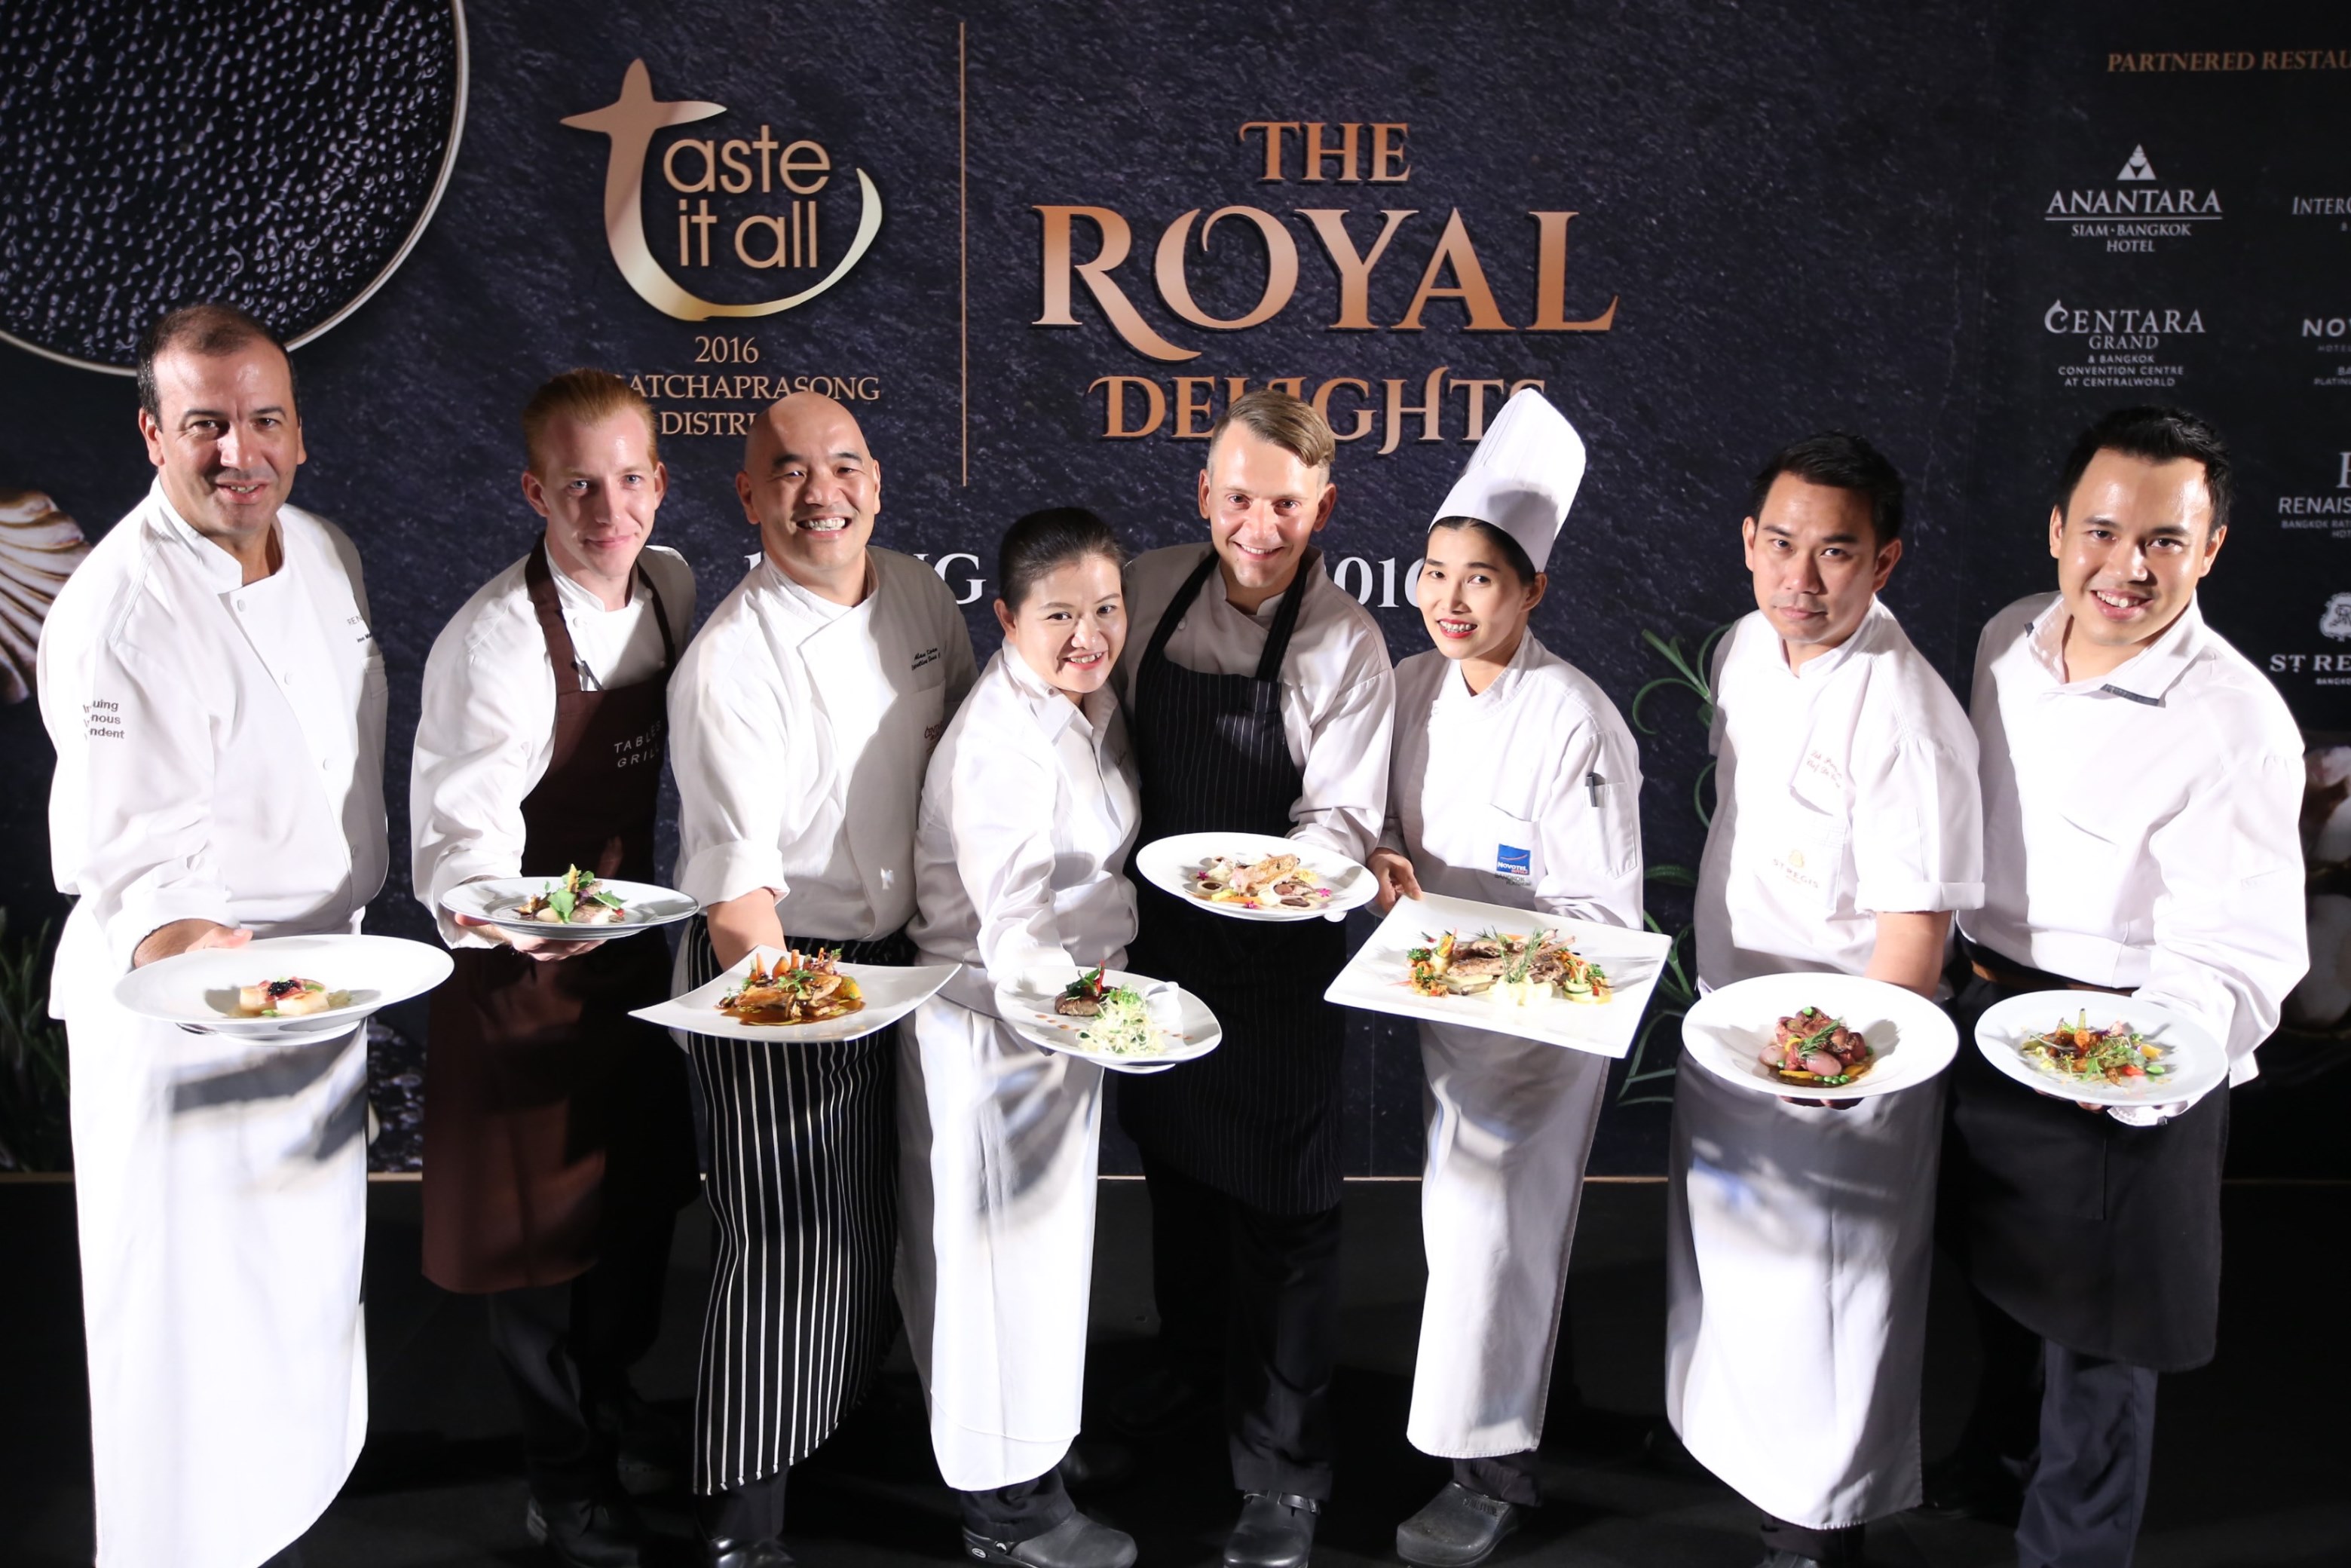 Taste it all 2016 @ Ratchaprasong : The Royal Delights” ราชประสงค์ ห้องอาหาร ราชประสงค์ ห้องอาหารโรงแรม อาหารโรงแรม